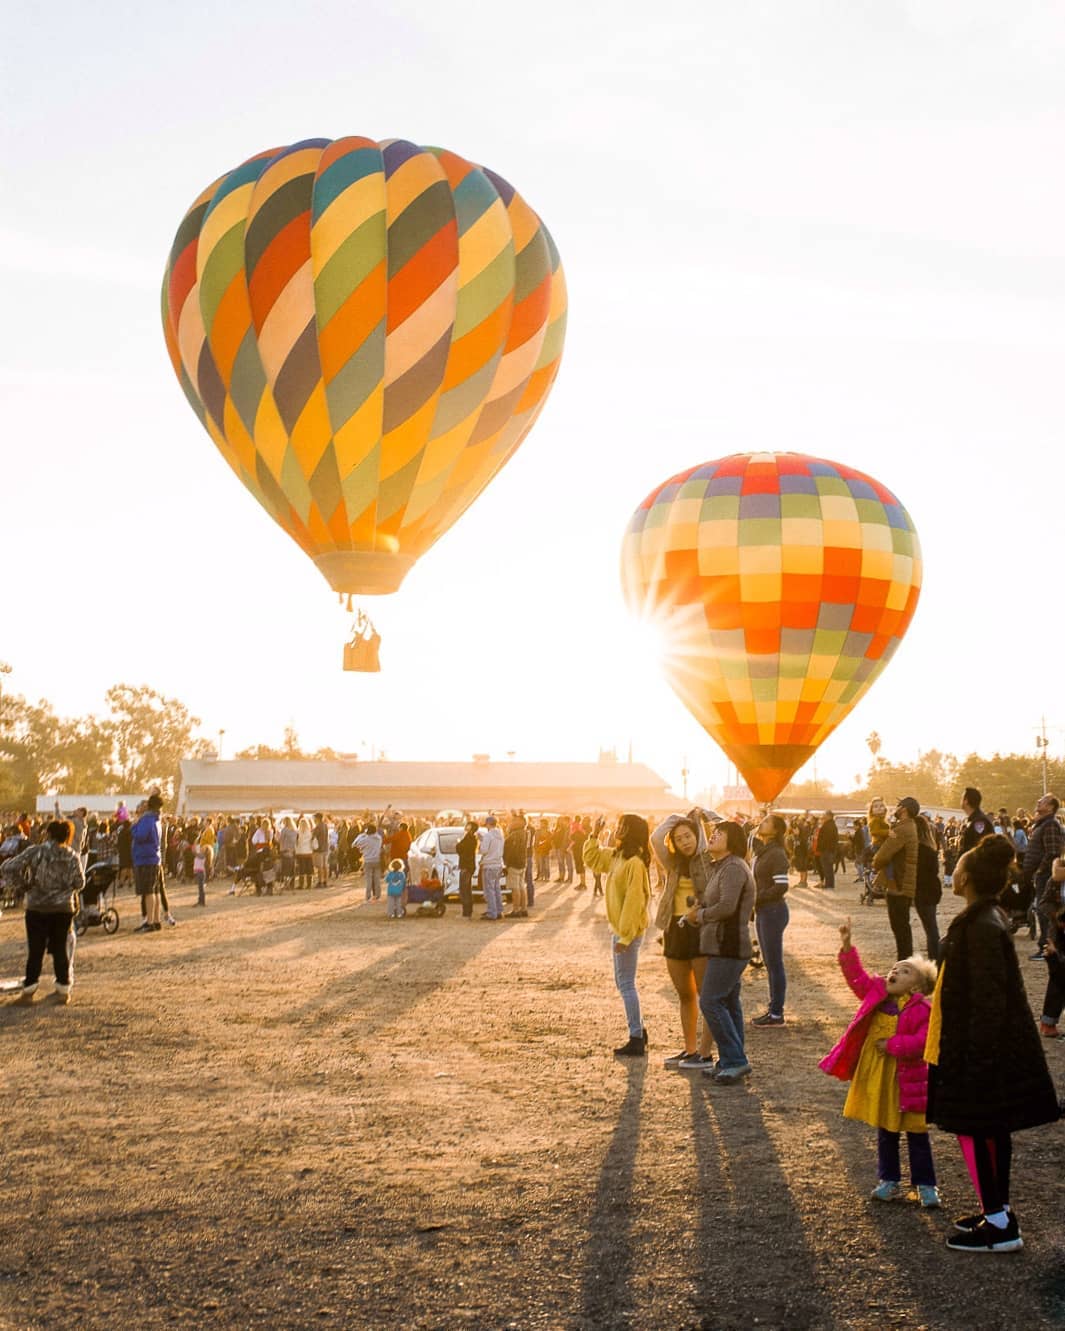 Two hot air balloons taking off in Clovis, CA. Photo by Instagram user @s.ligonde